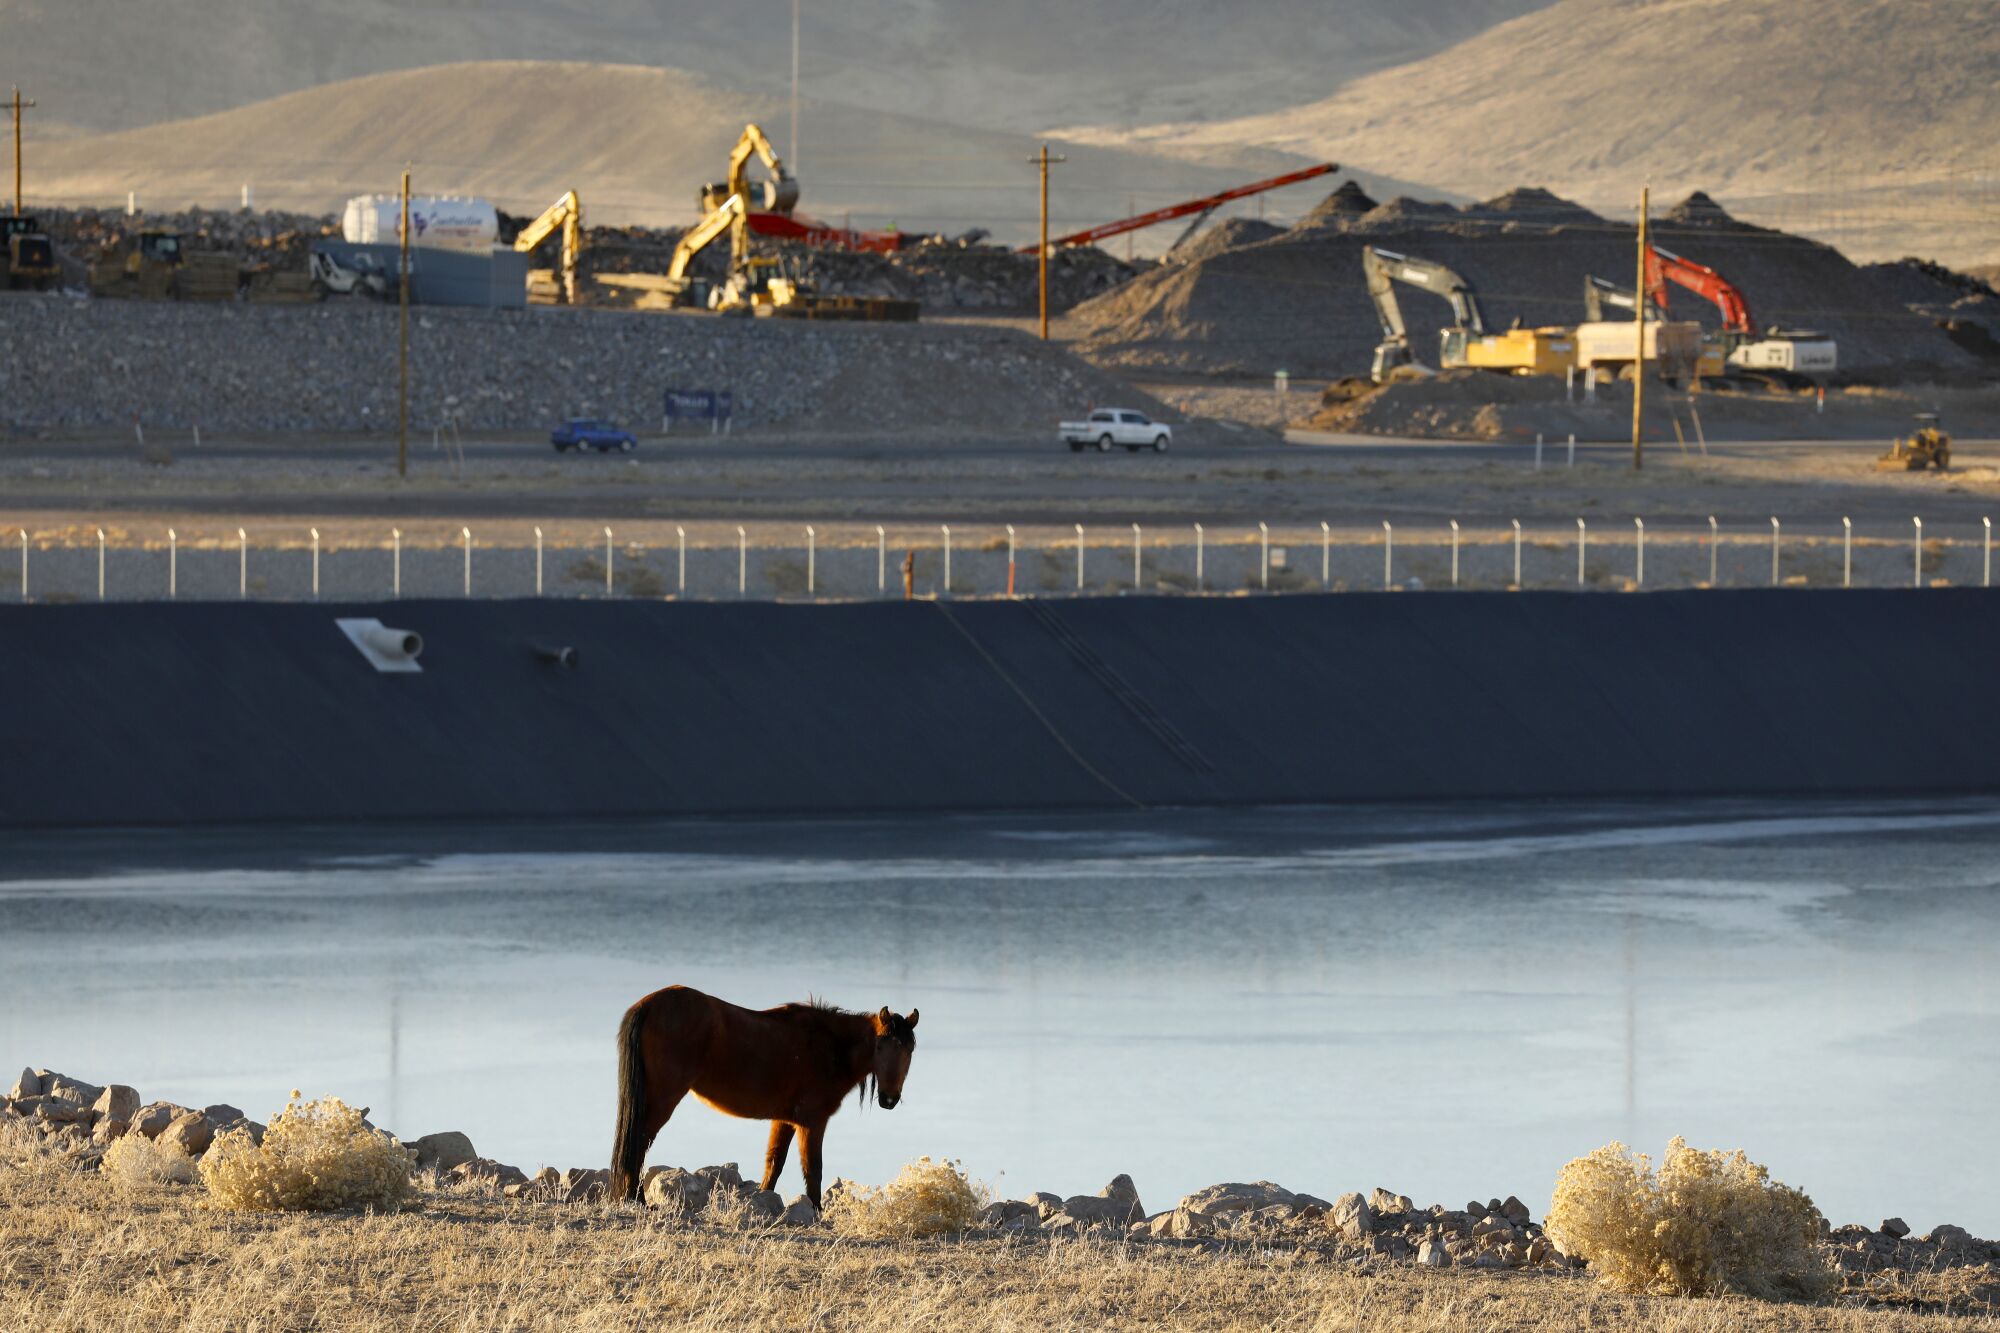 A horse in the foreground looks toward the camera while standing near a reservoir. A construction site is in the background.